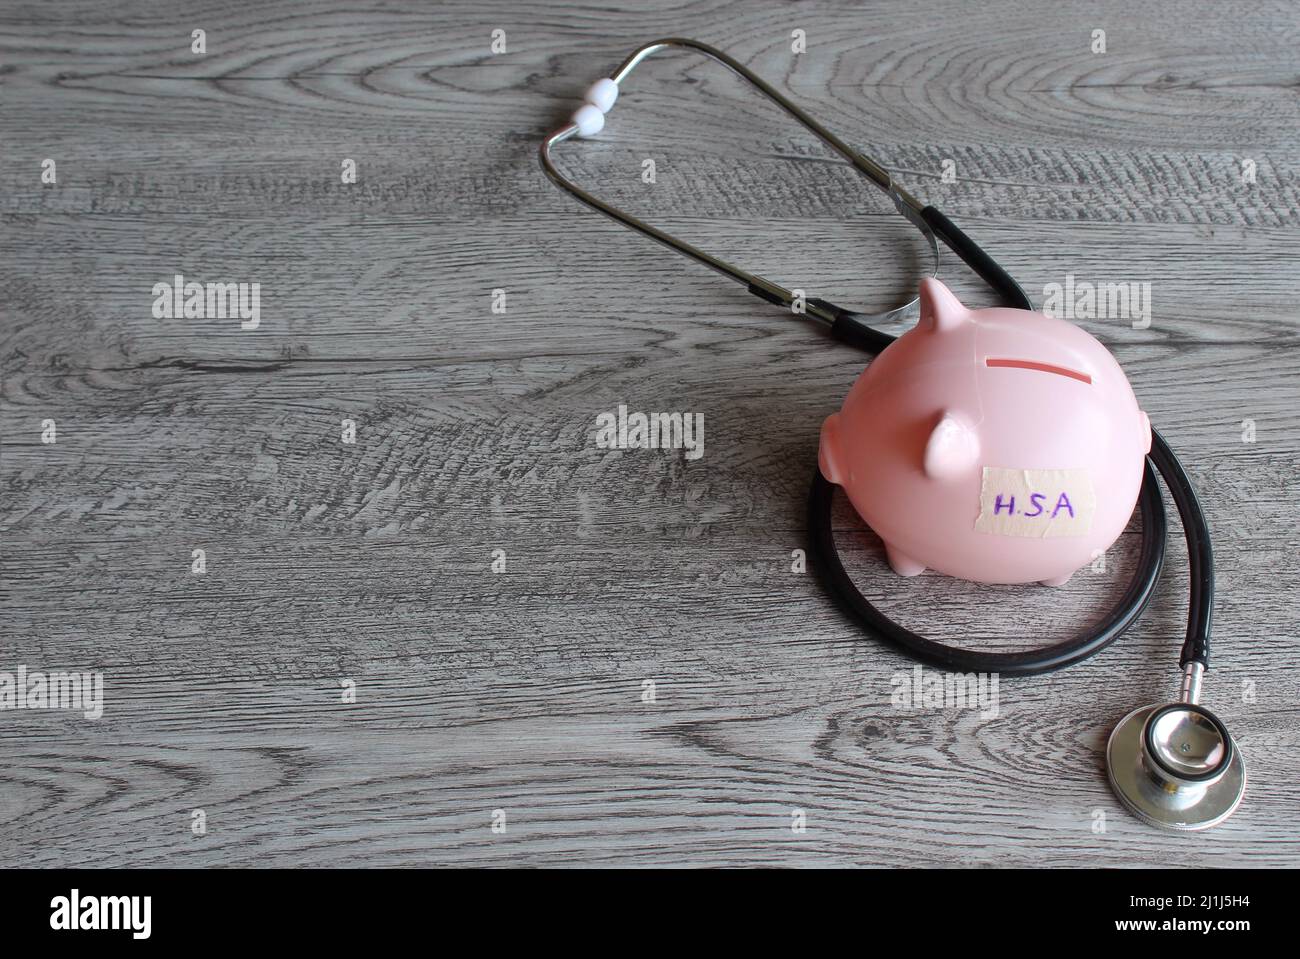 HSA or Health Savings Account text on piggy bank and stethoscope. Copy space for text. Stock Photo